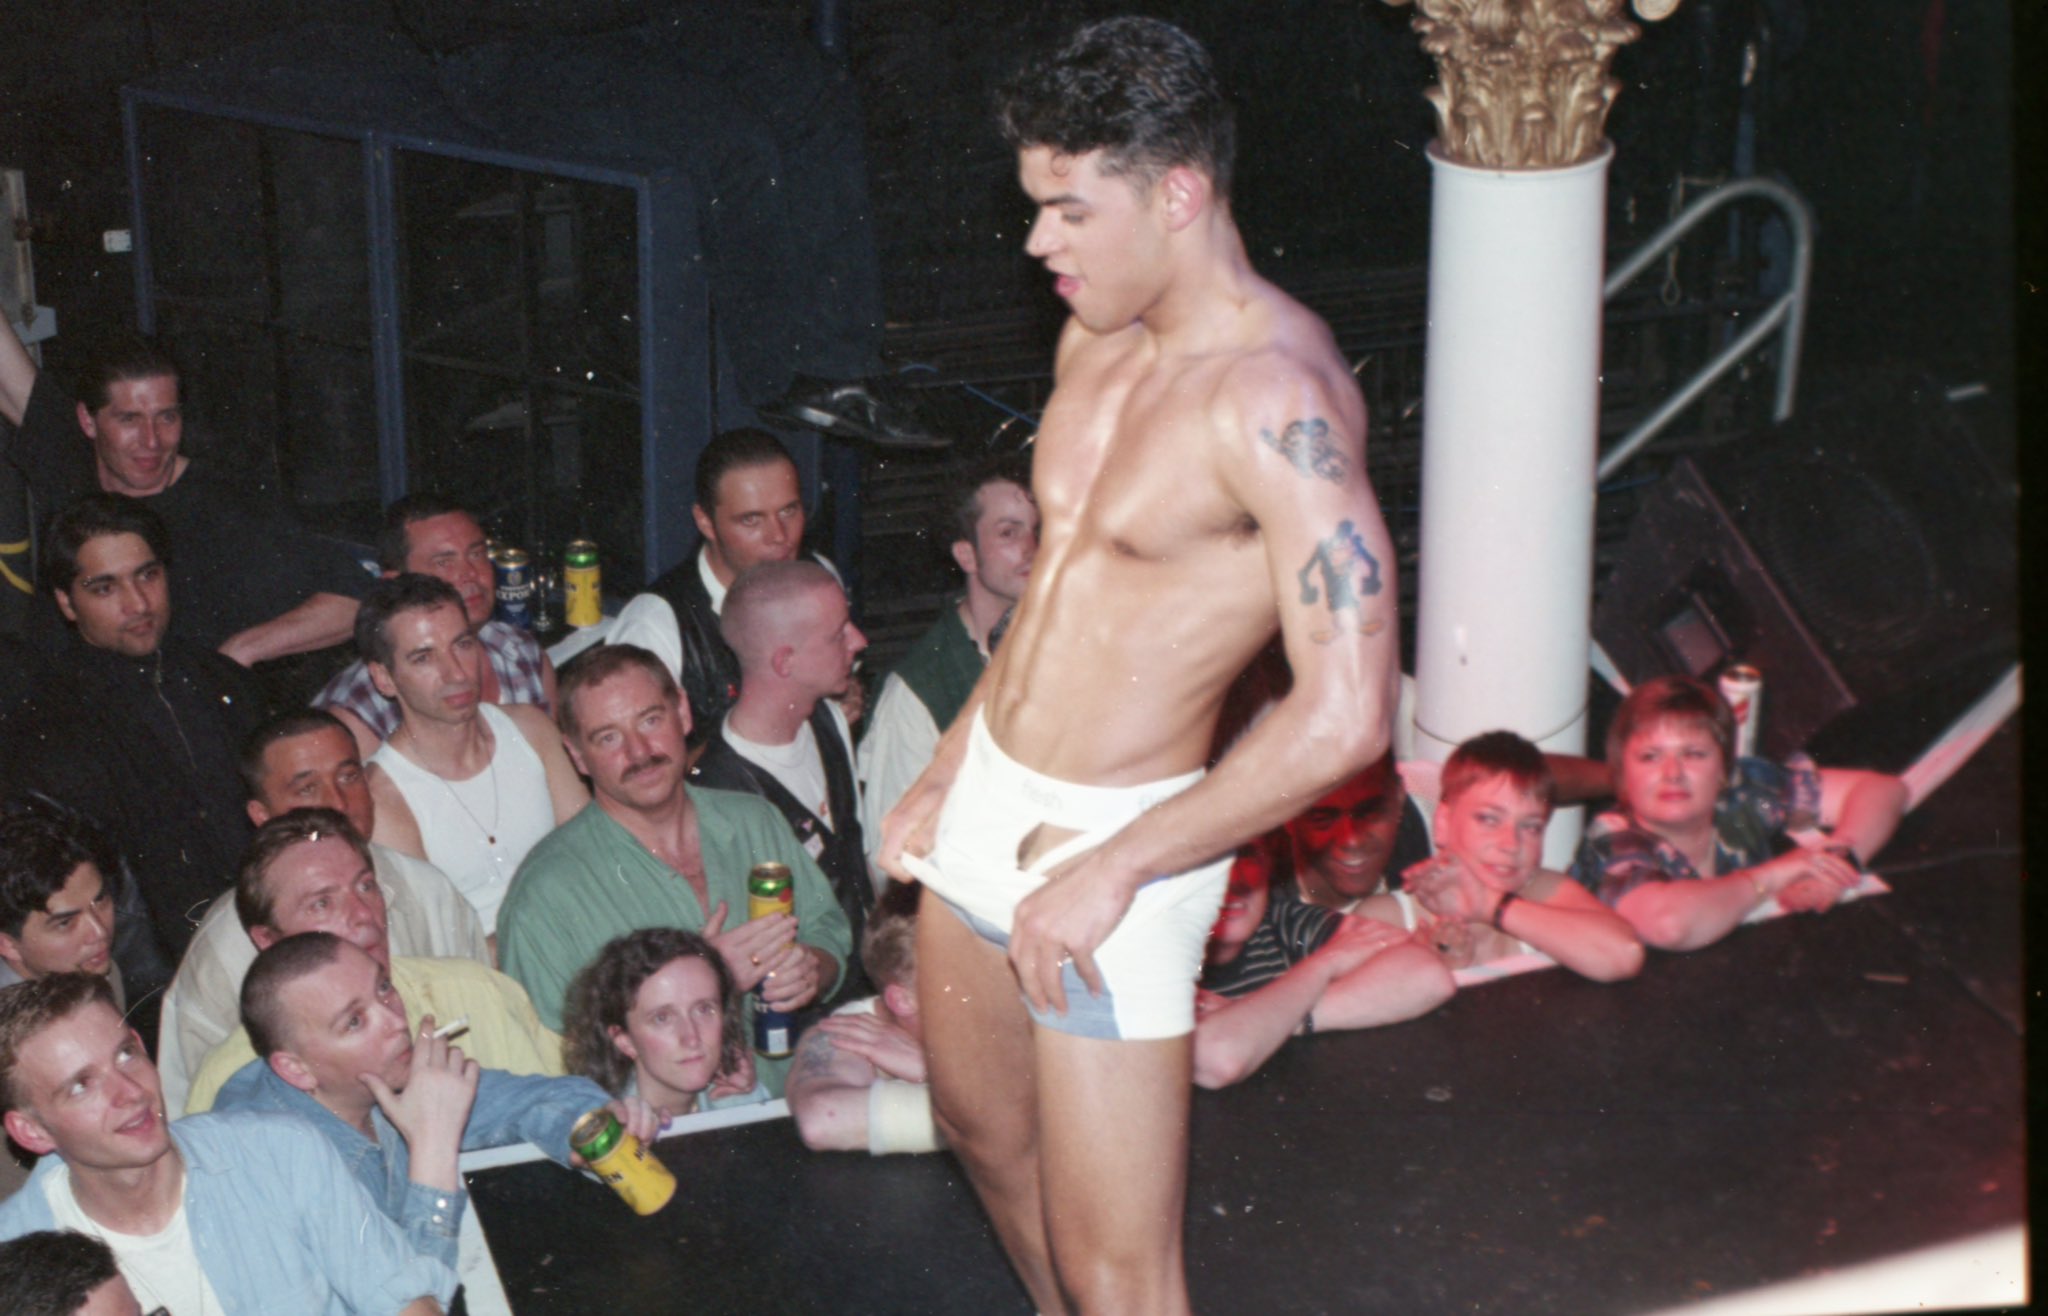 The Linden Archives: an affectionate look back on the brash, thriving gay scene of the 1990s